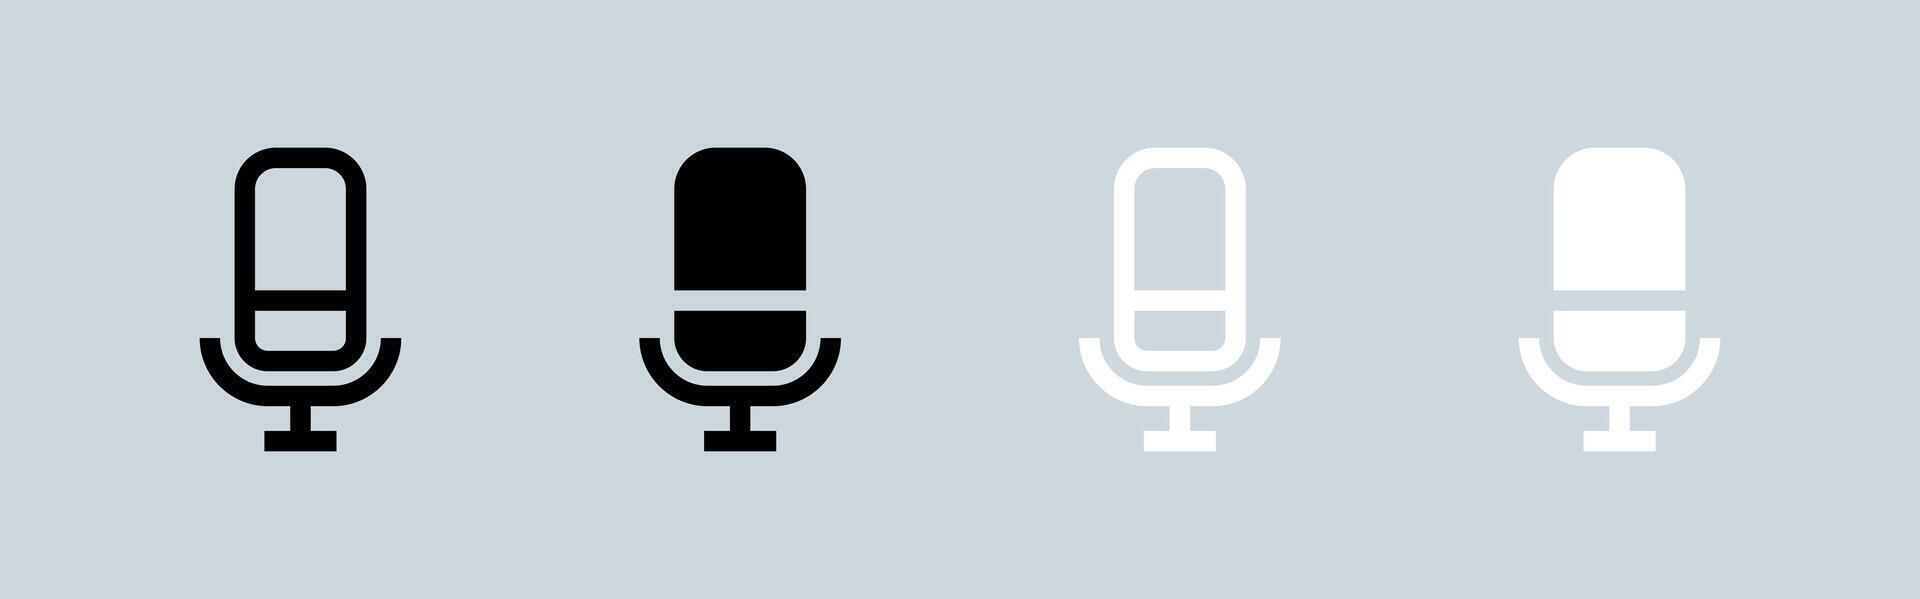 Microphone icon set in black and white. Voice signs vector illustration.